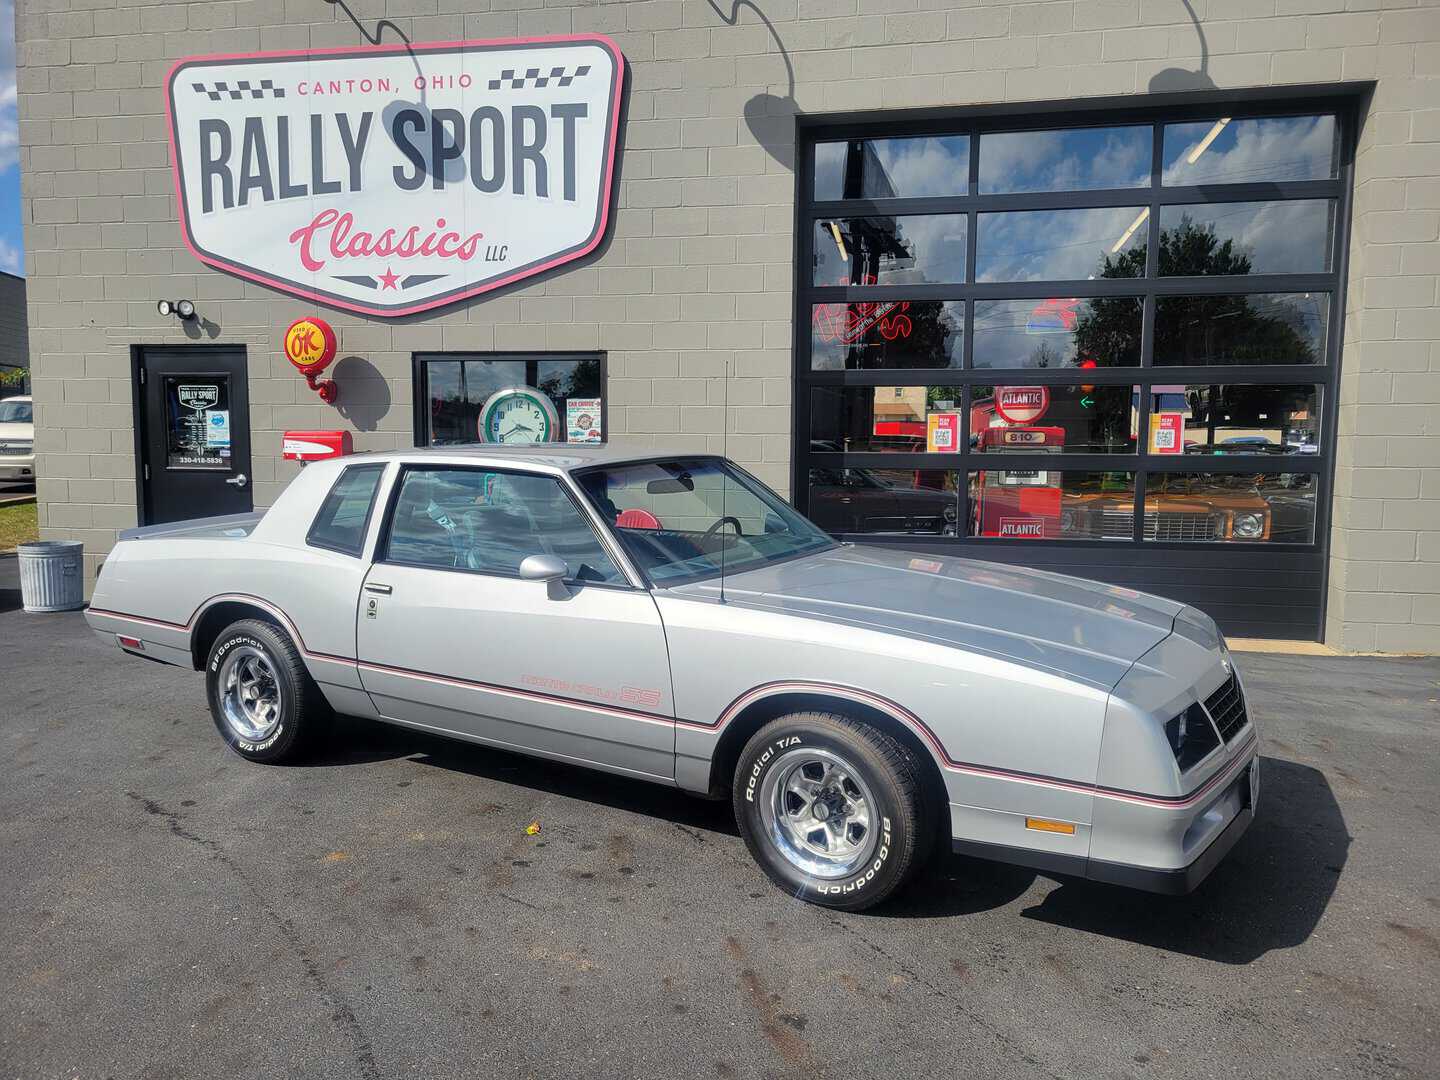 A silver Buick Regal is parked in front of a race car shop featuring a 1985 Monte Carlo SS.